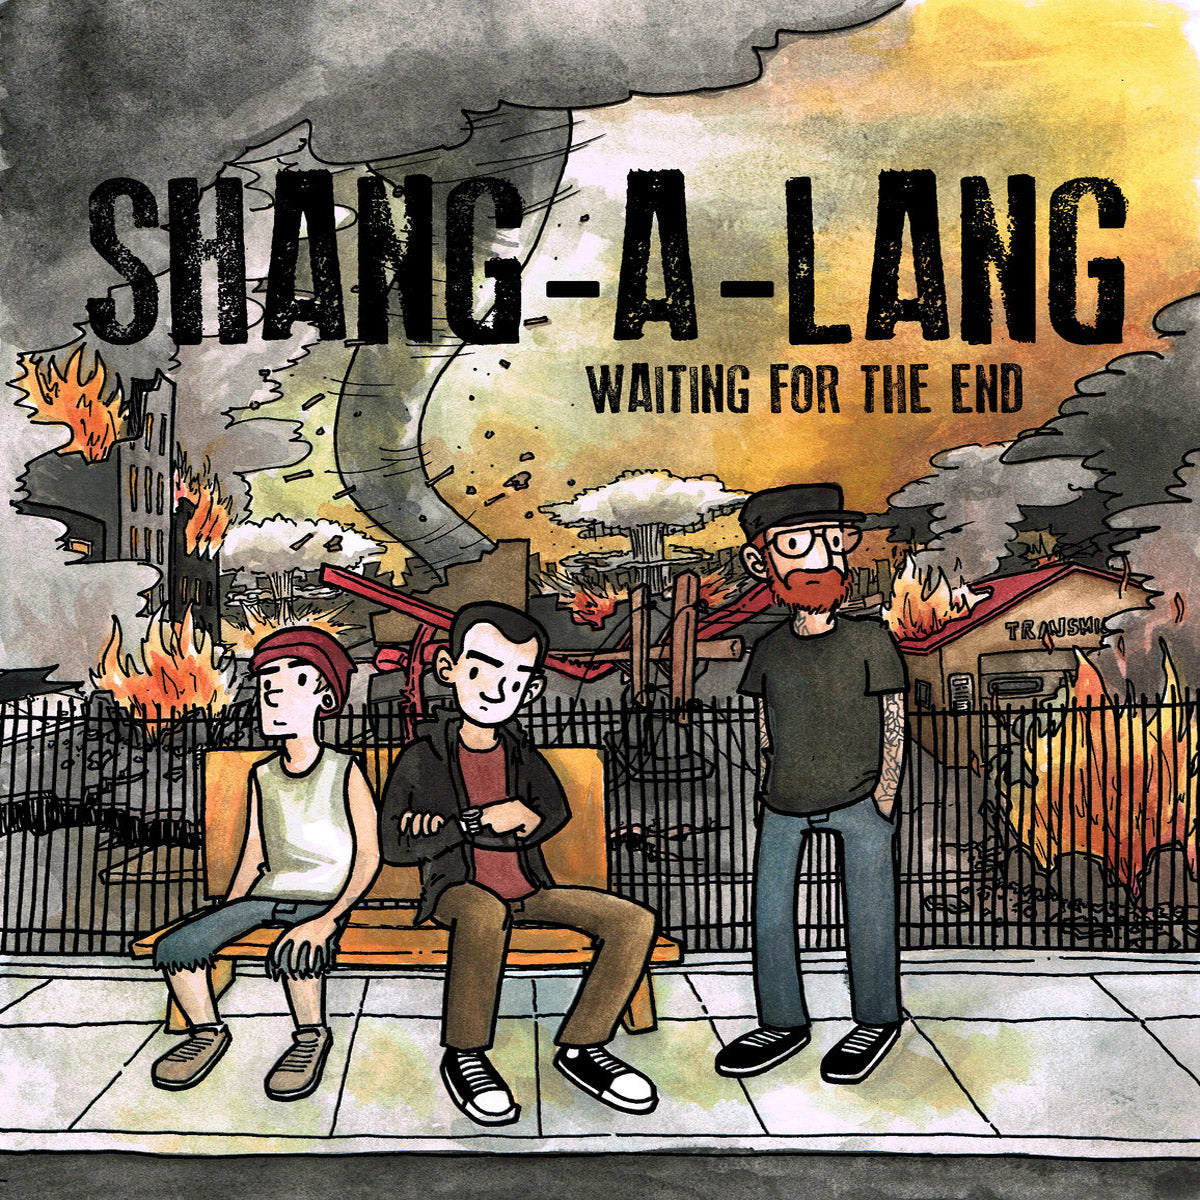 Shang-A-Lang - Waiting For The End 7" ~W/ MITCH CLEM ART!